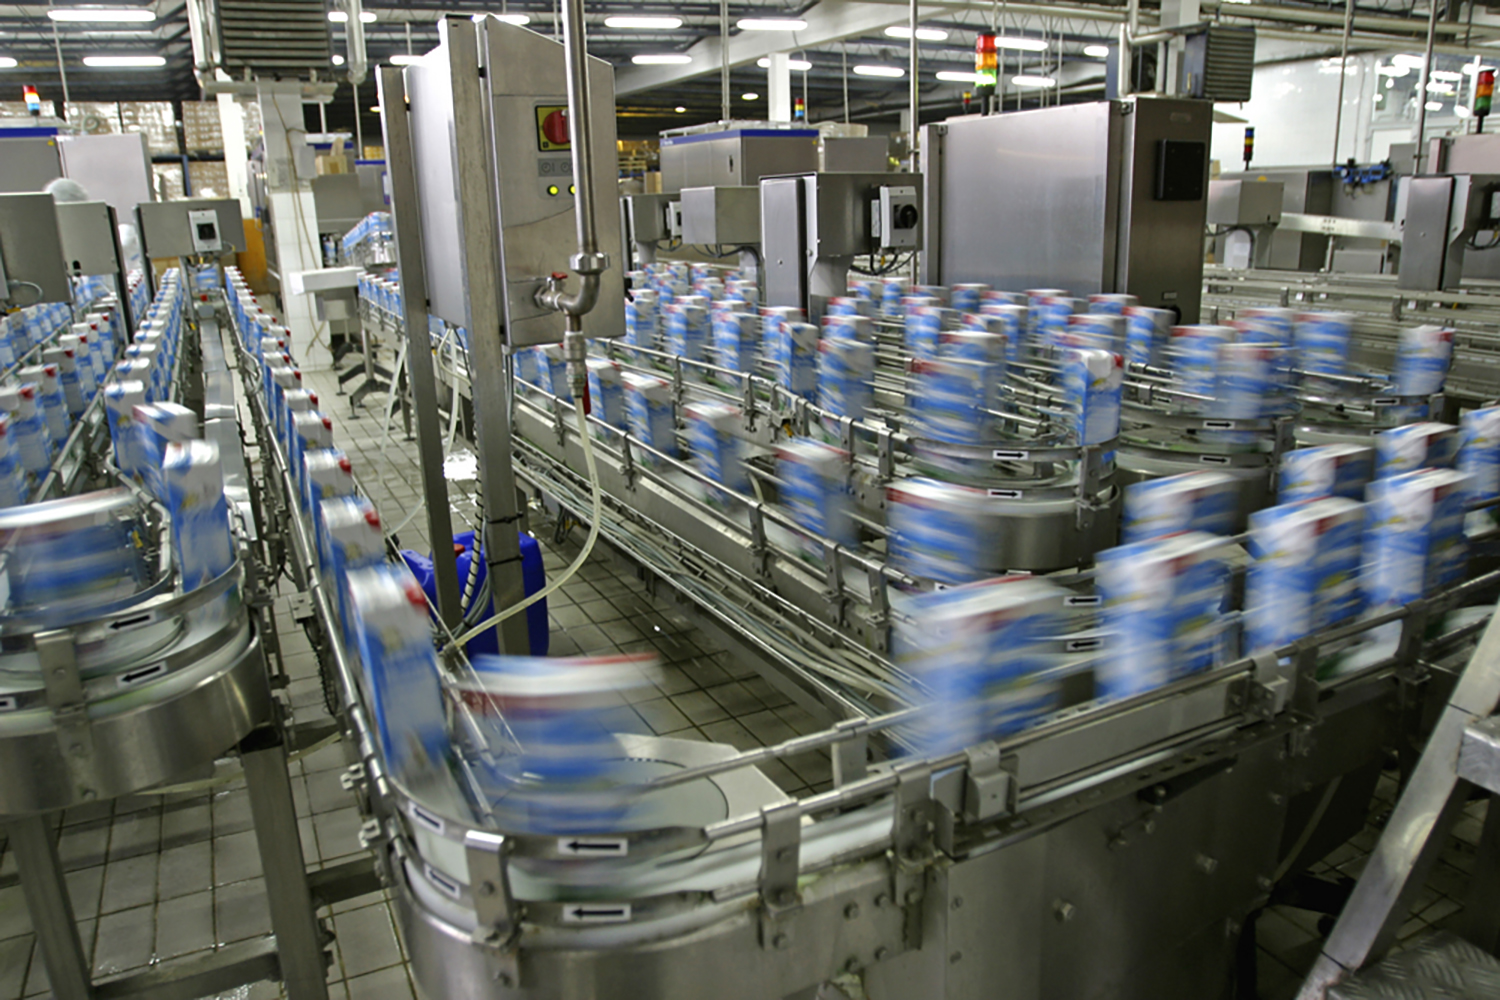 High standards define hygienic design principles for machines and components avoiding bacterial contamination of food and beverage products.